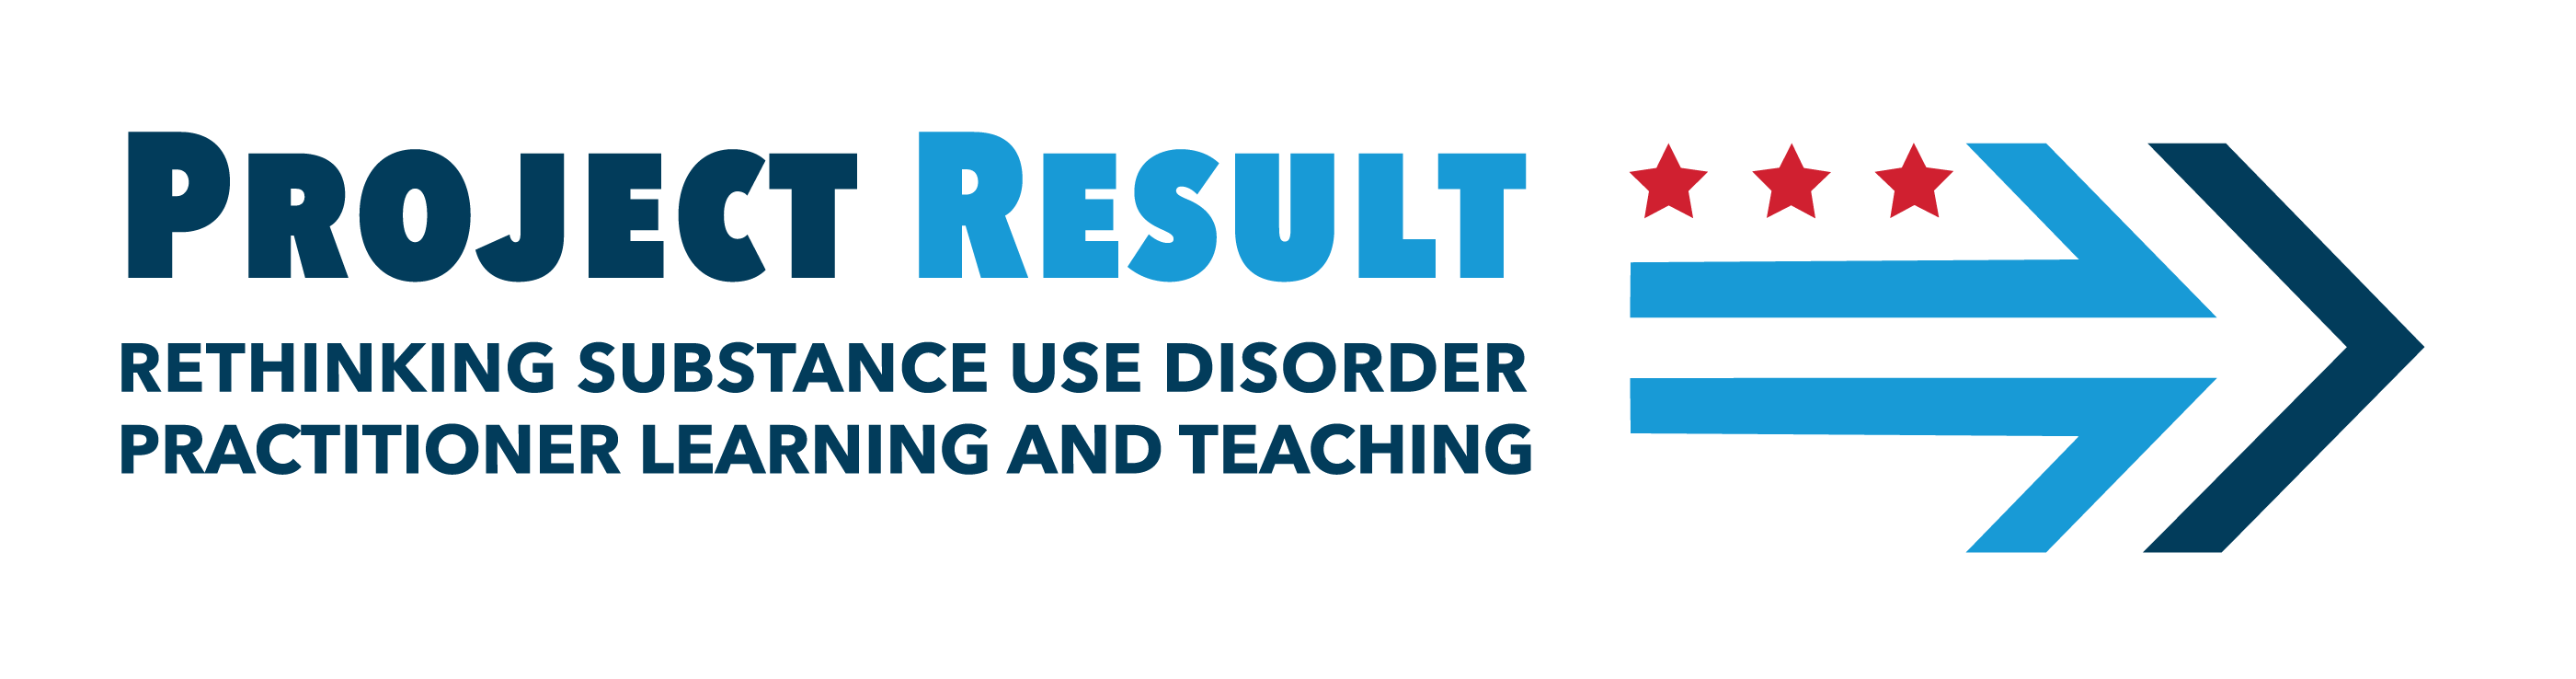 Project Result: Rethinking Substance Use Disorder Practitioner Learning and Teaching